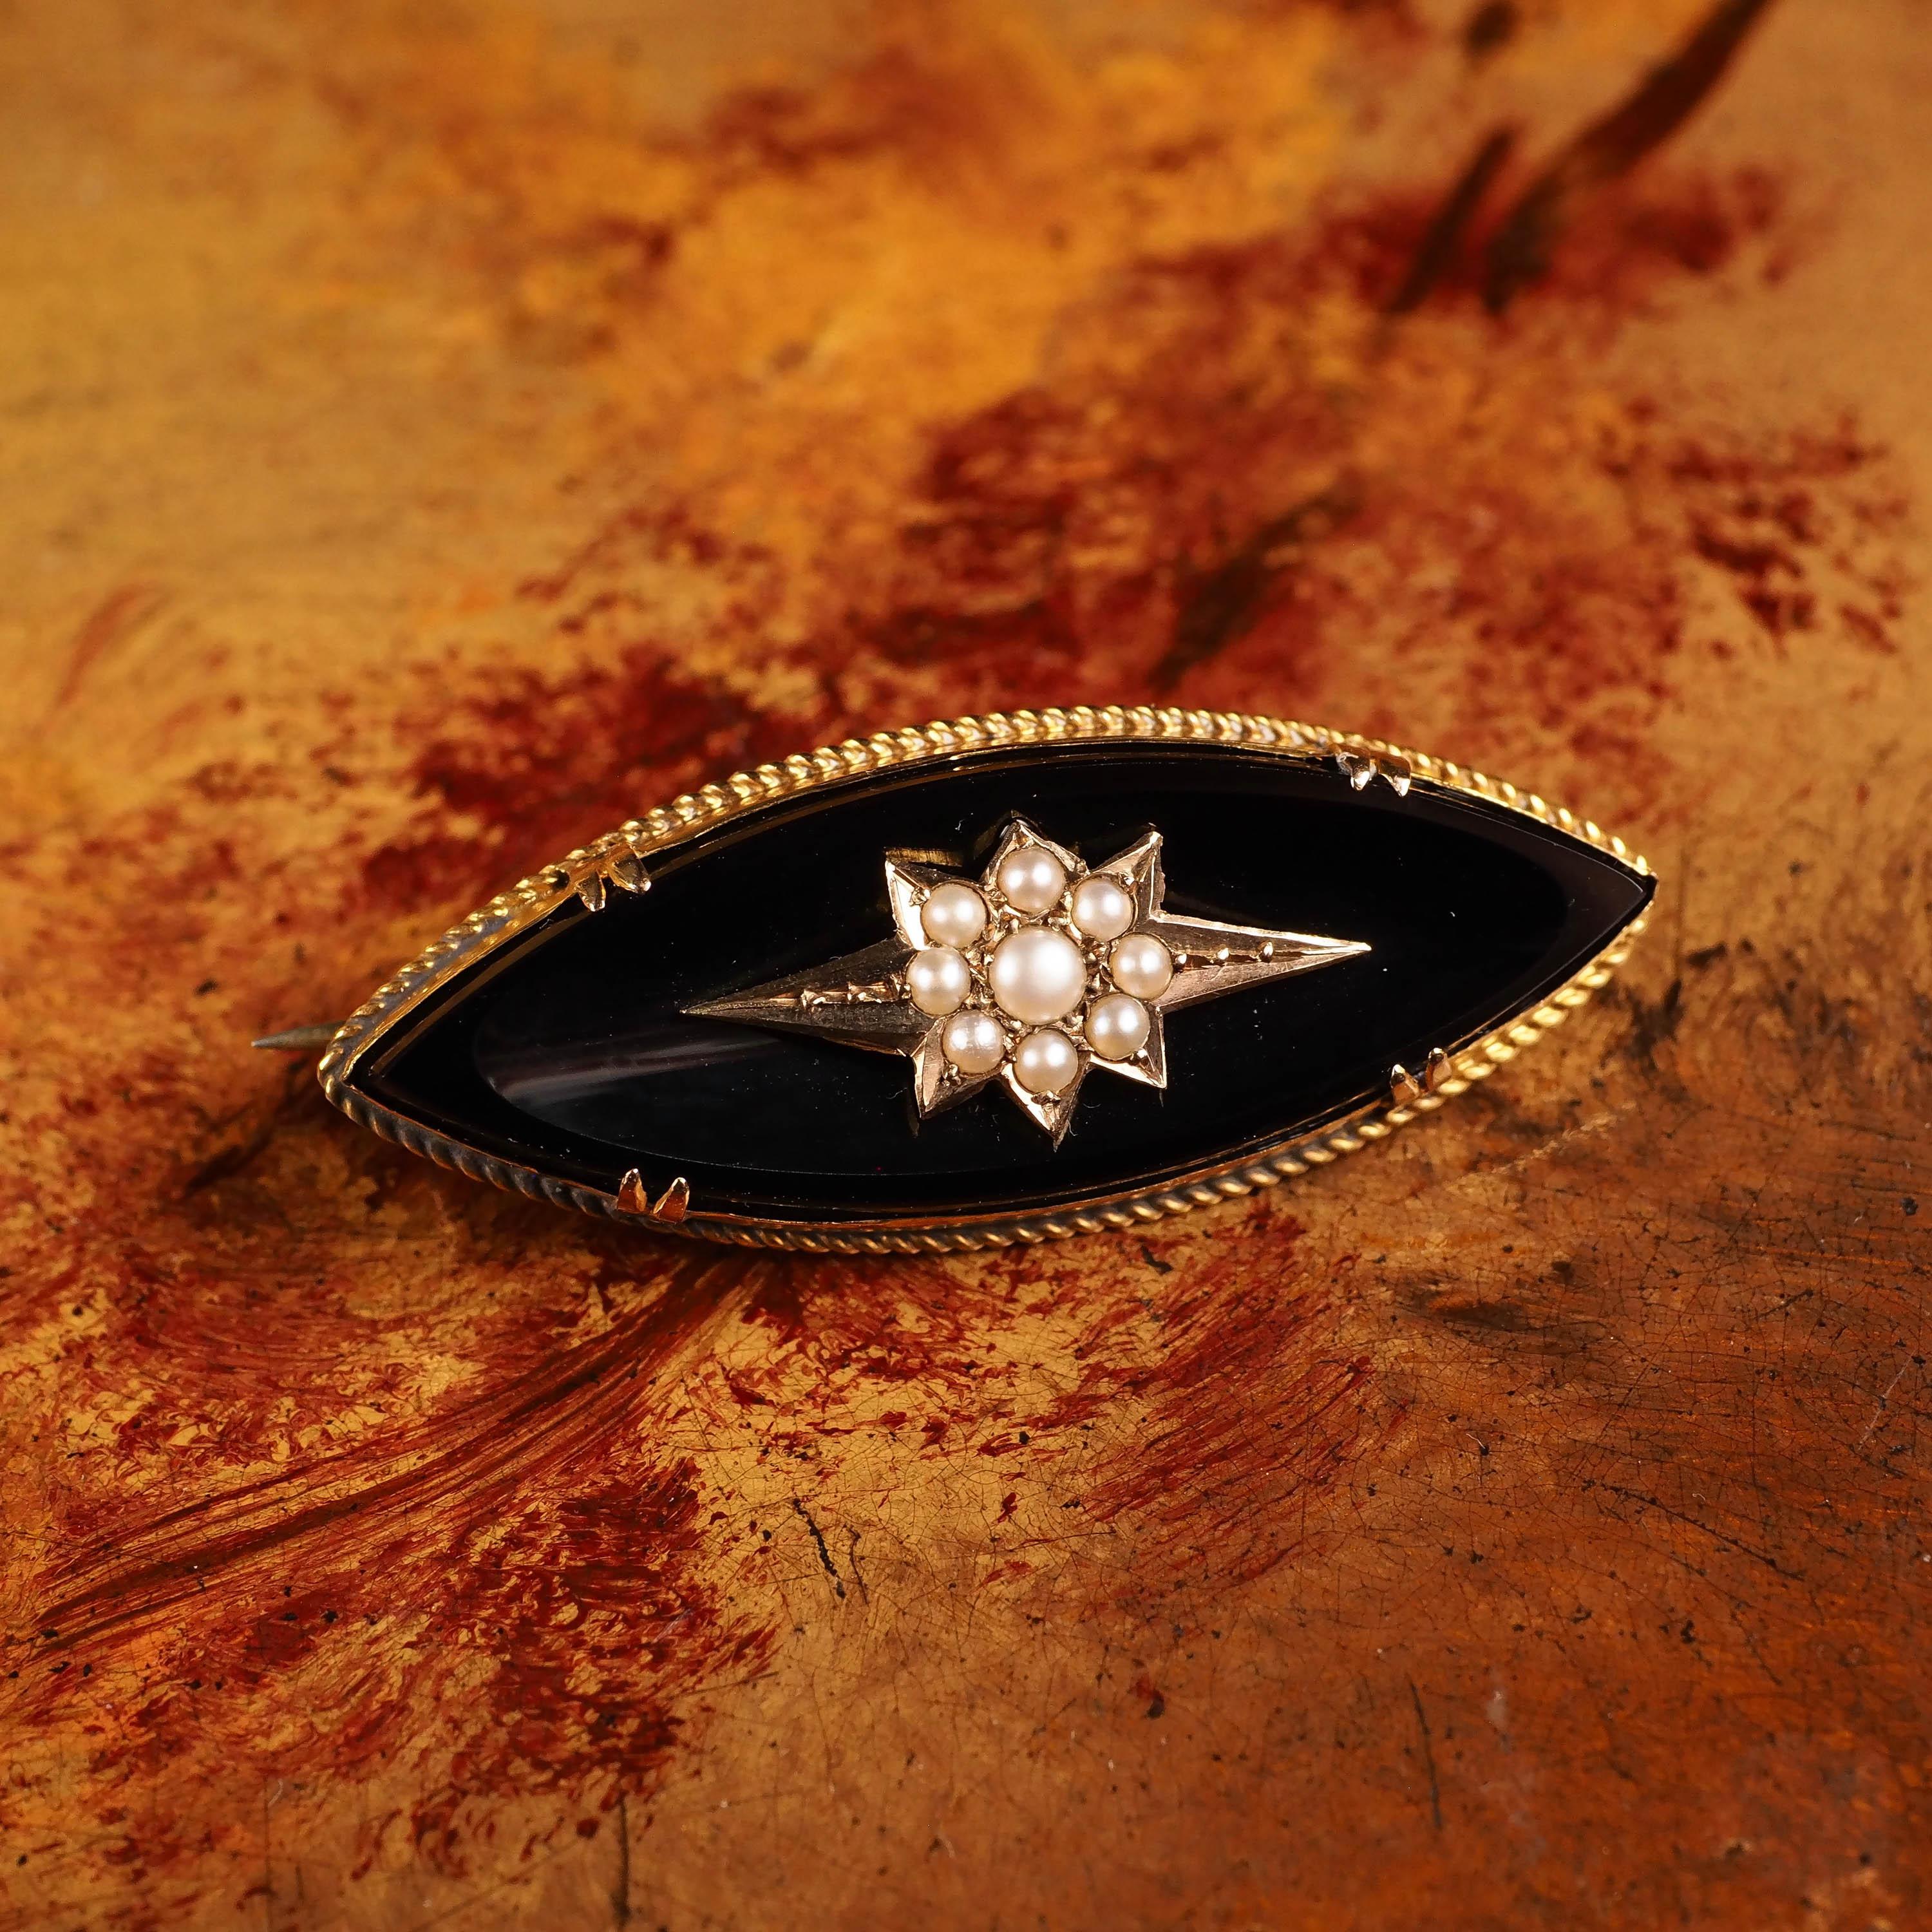 Antique Victorian 18k Gold Onyx & Pearl Star Brooch, circa 1890 For Sale 1